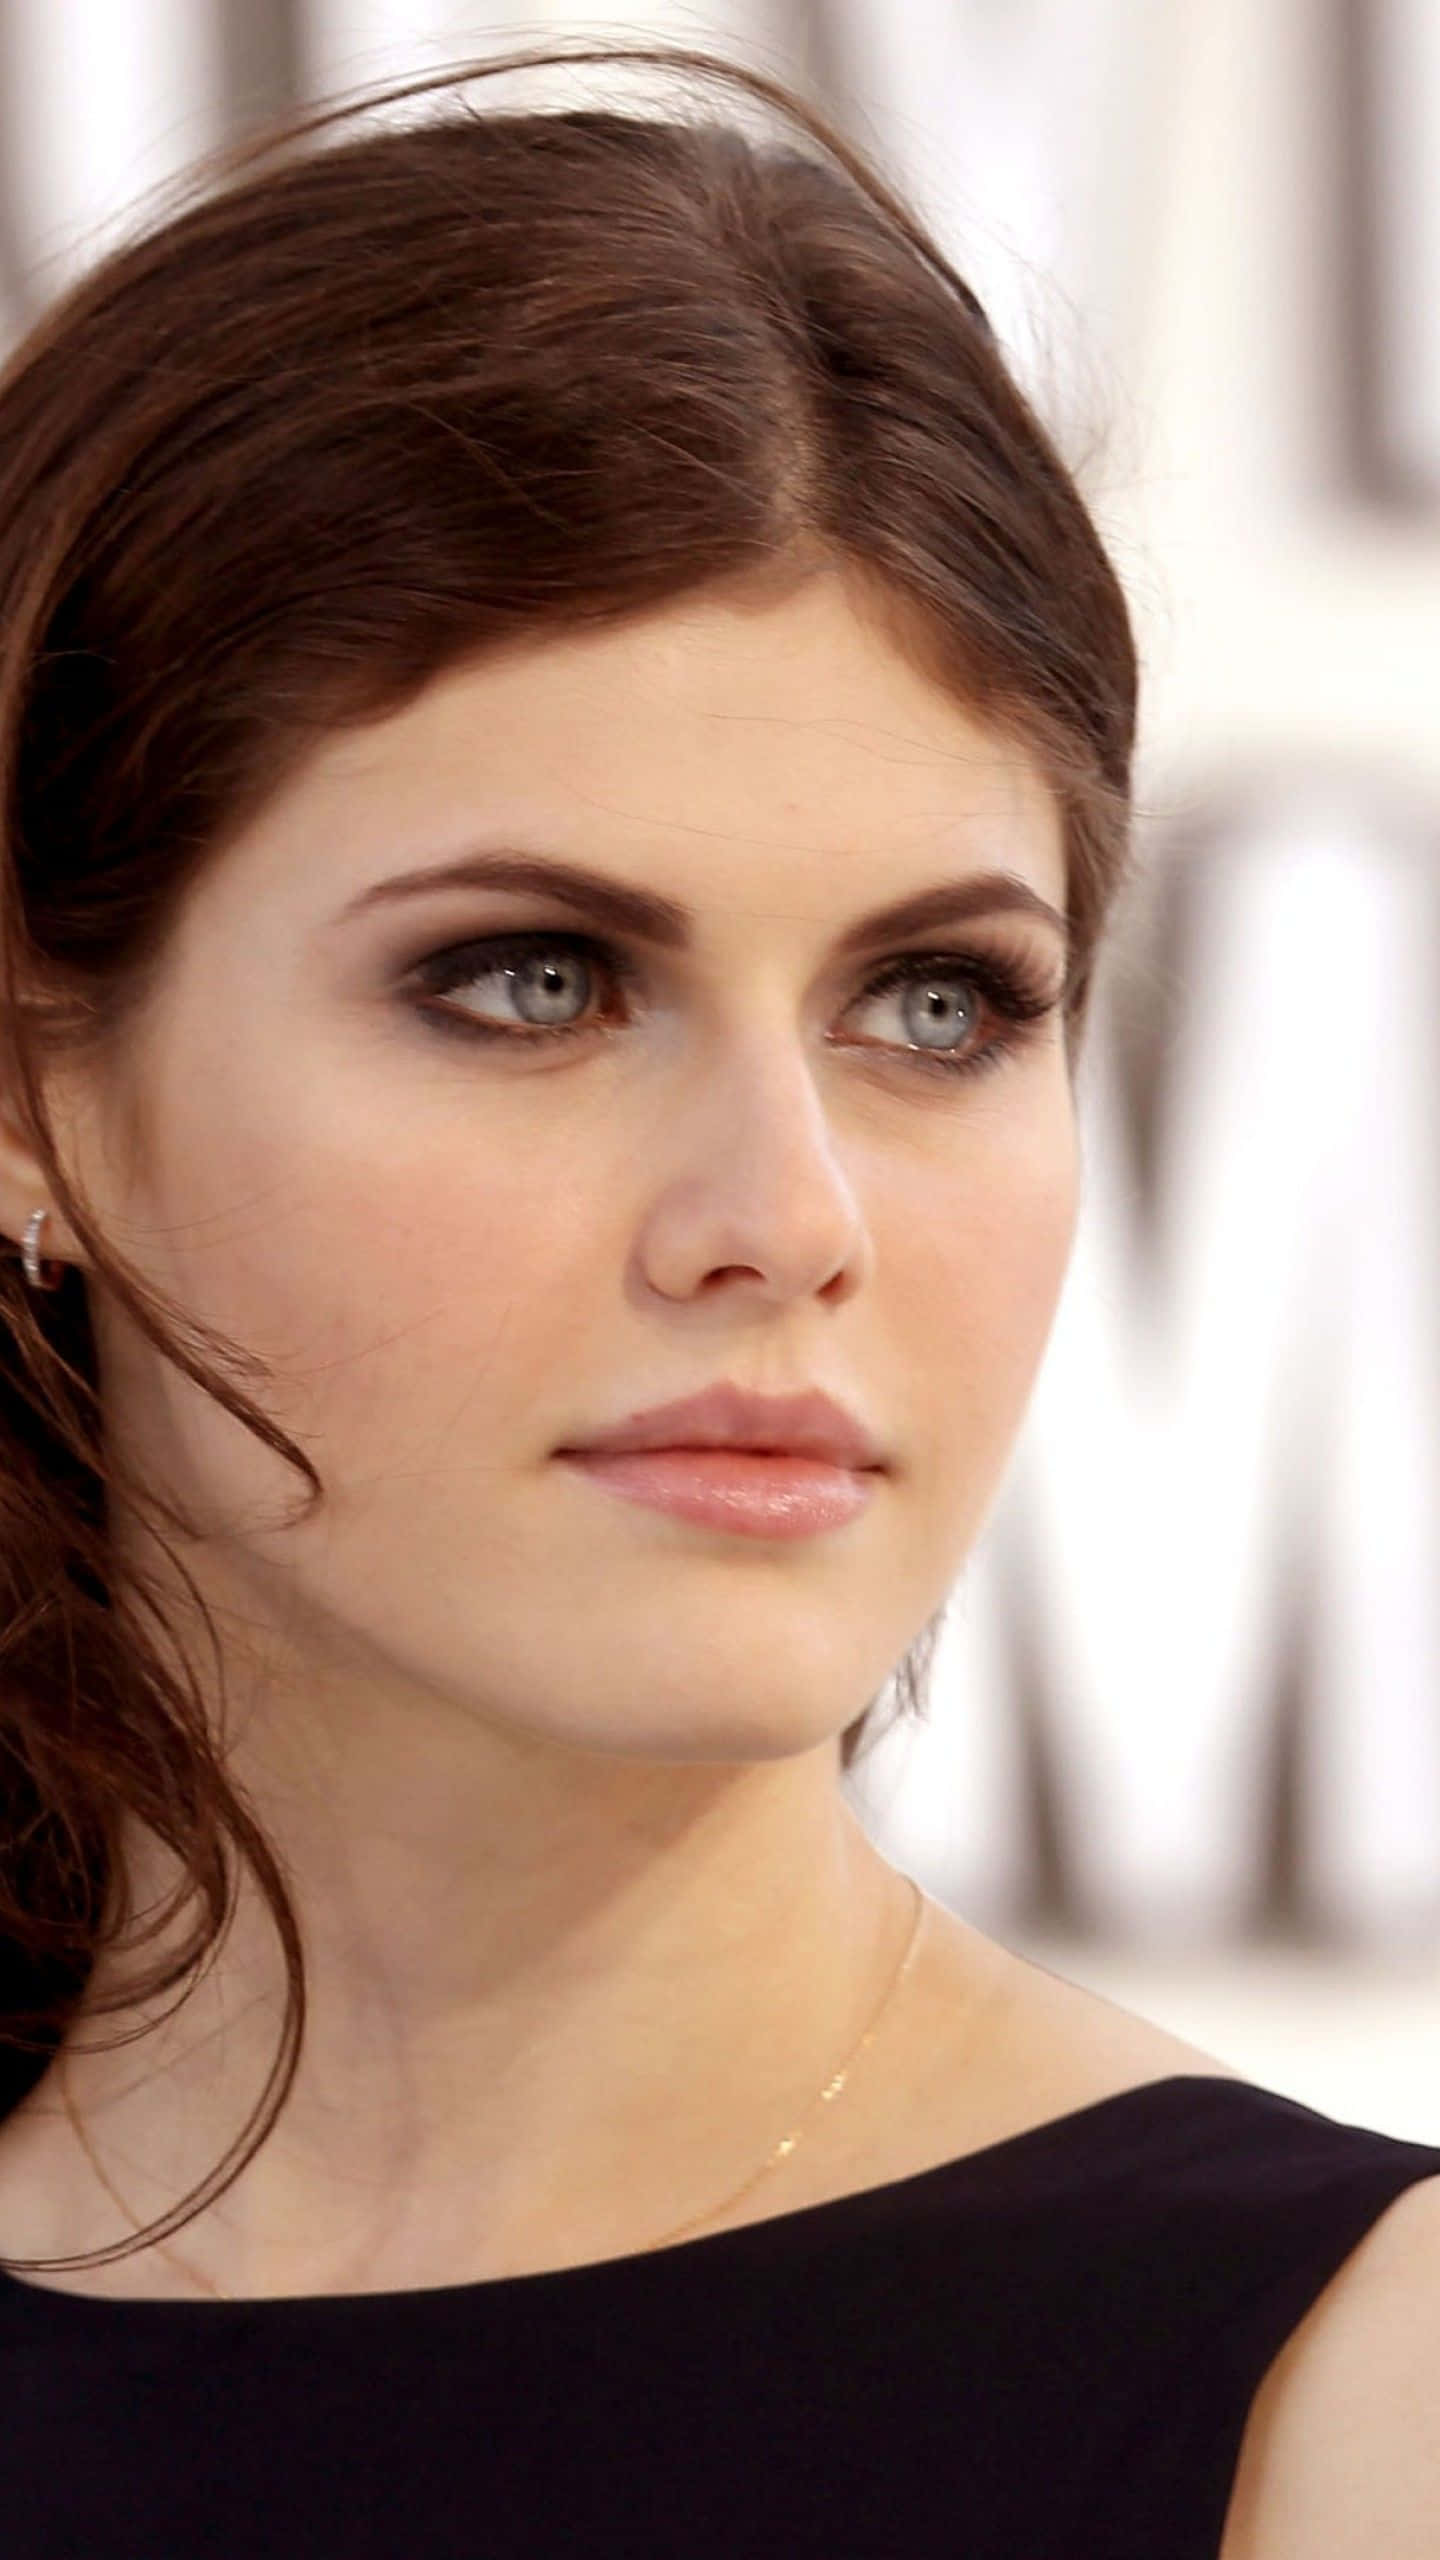 Stunning Alexandra Daddario posing in a chic outfit